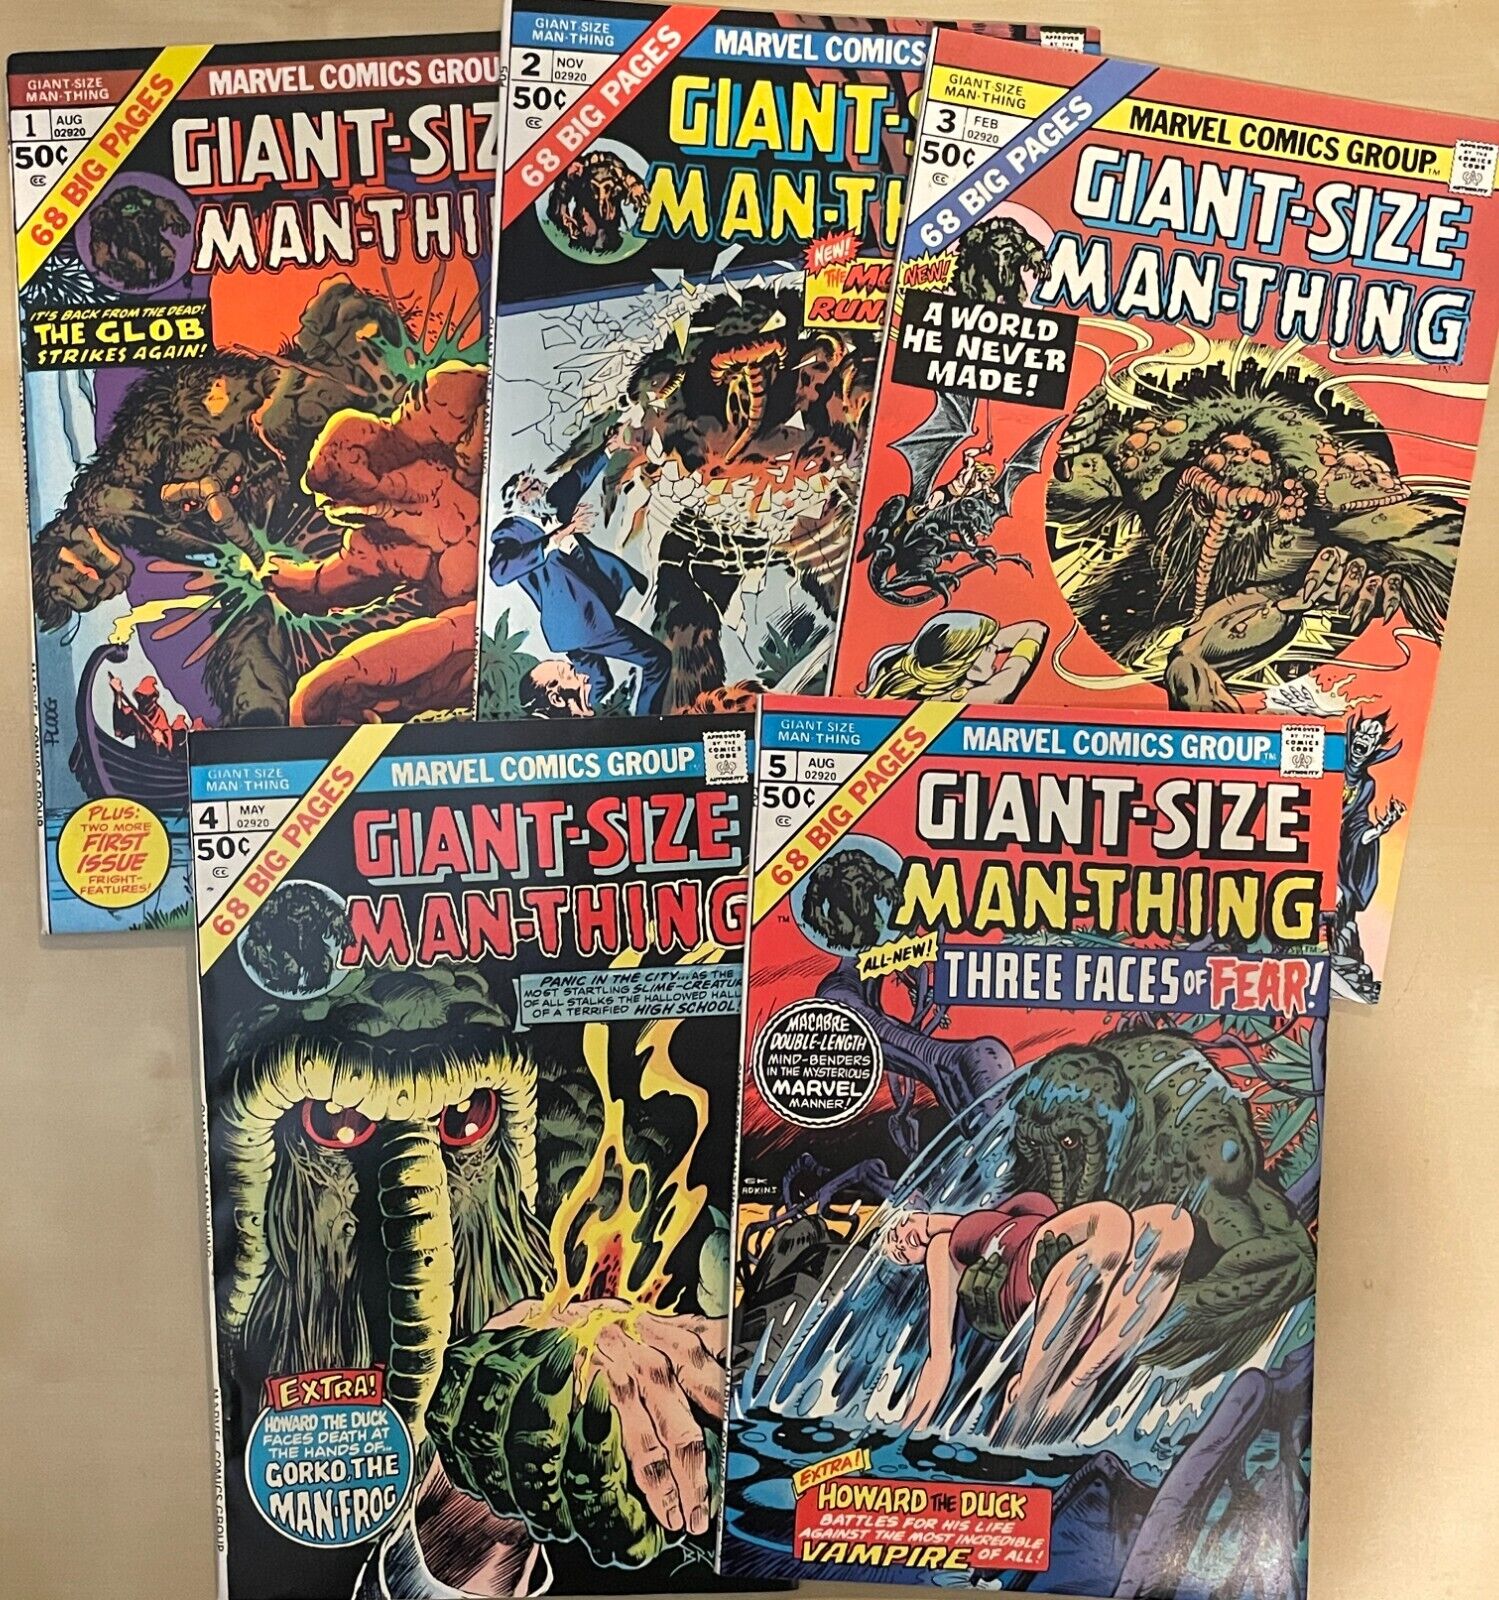 GIANT SIZE MAN-THING #1 2 3 4 5 (1974) HIGHER GRADE LOT OF 5 MARVEL COMICS